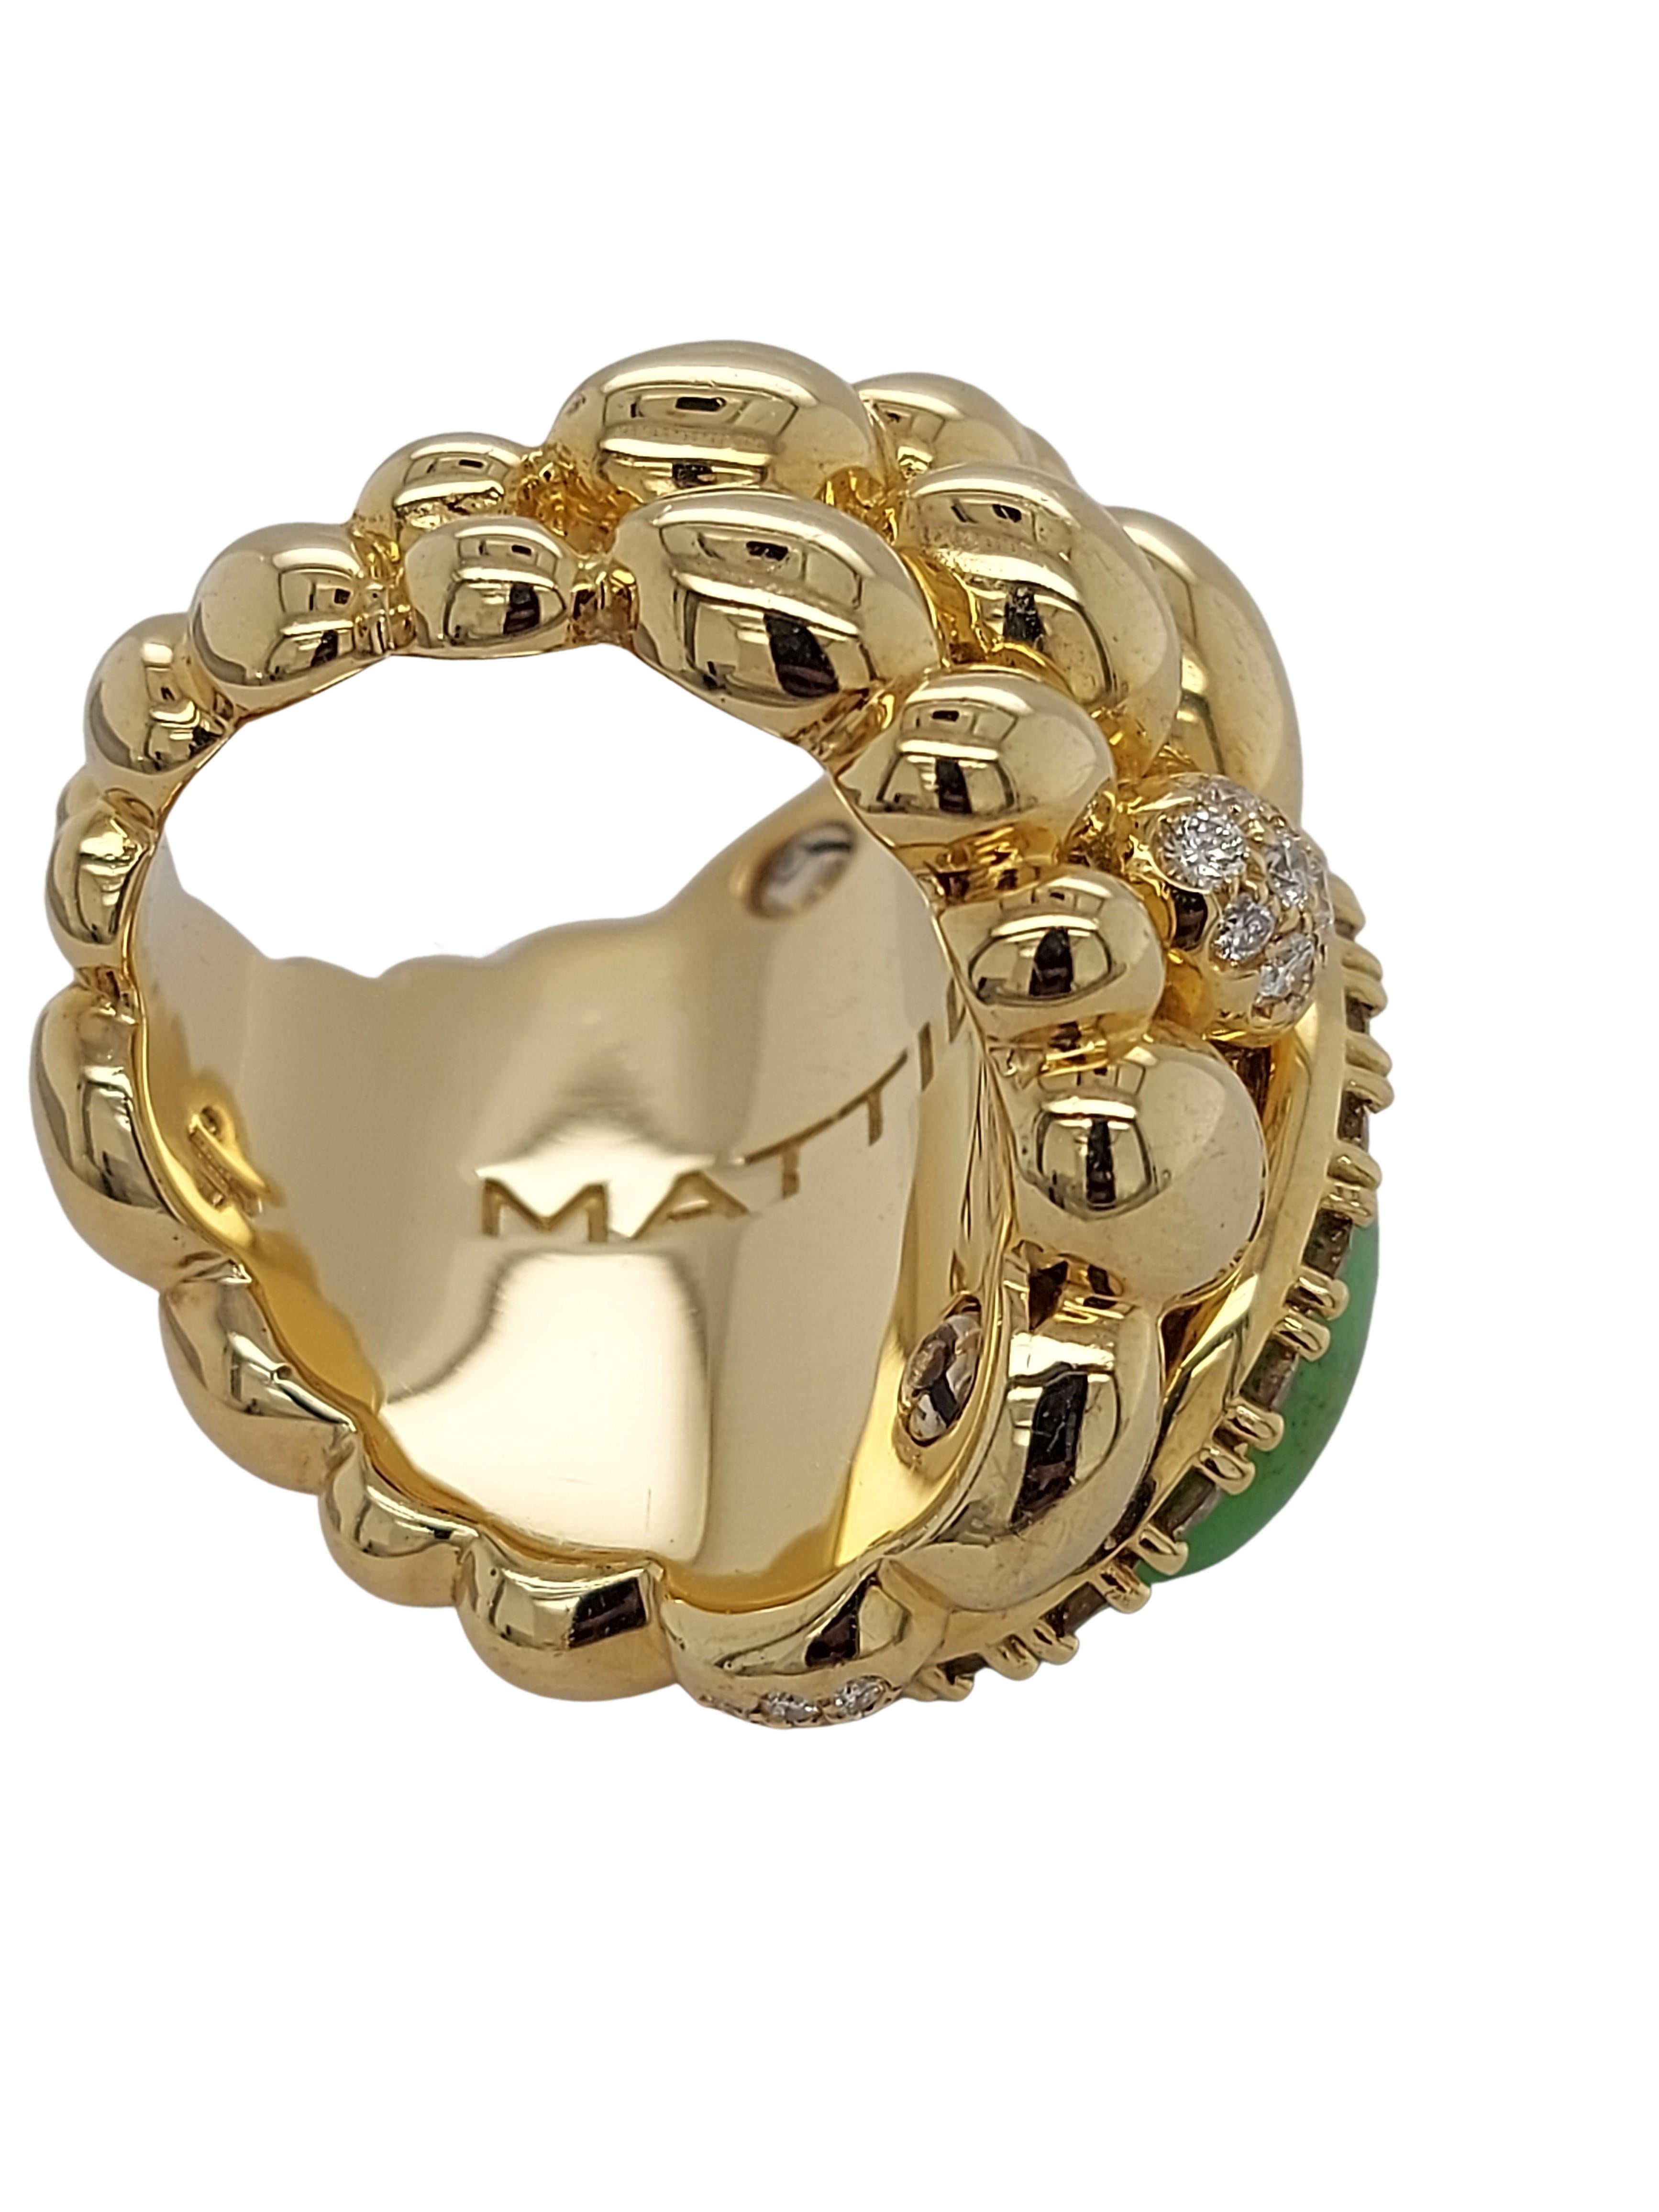 Women's or Men's 18kt Yellow Gold Clustered Mattioli Ring, with Big Green Stone & 3.2ct Diamonds